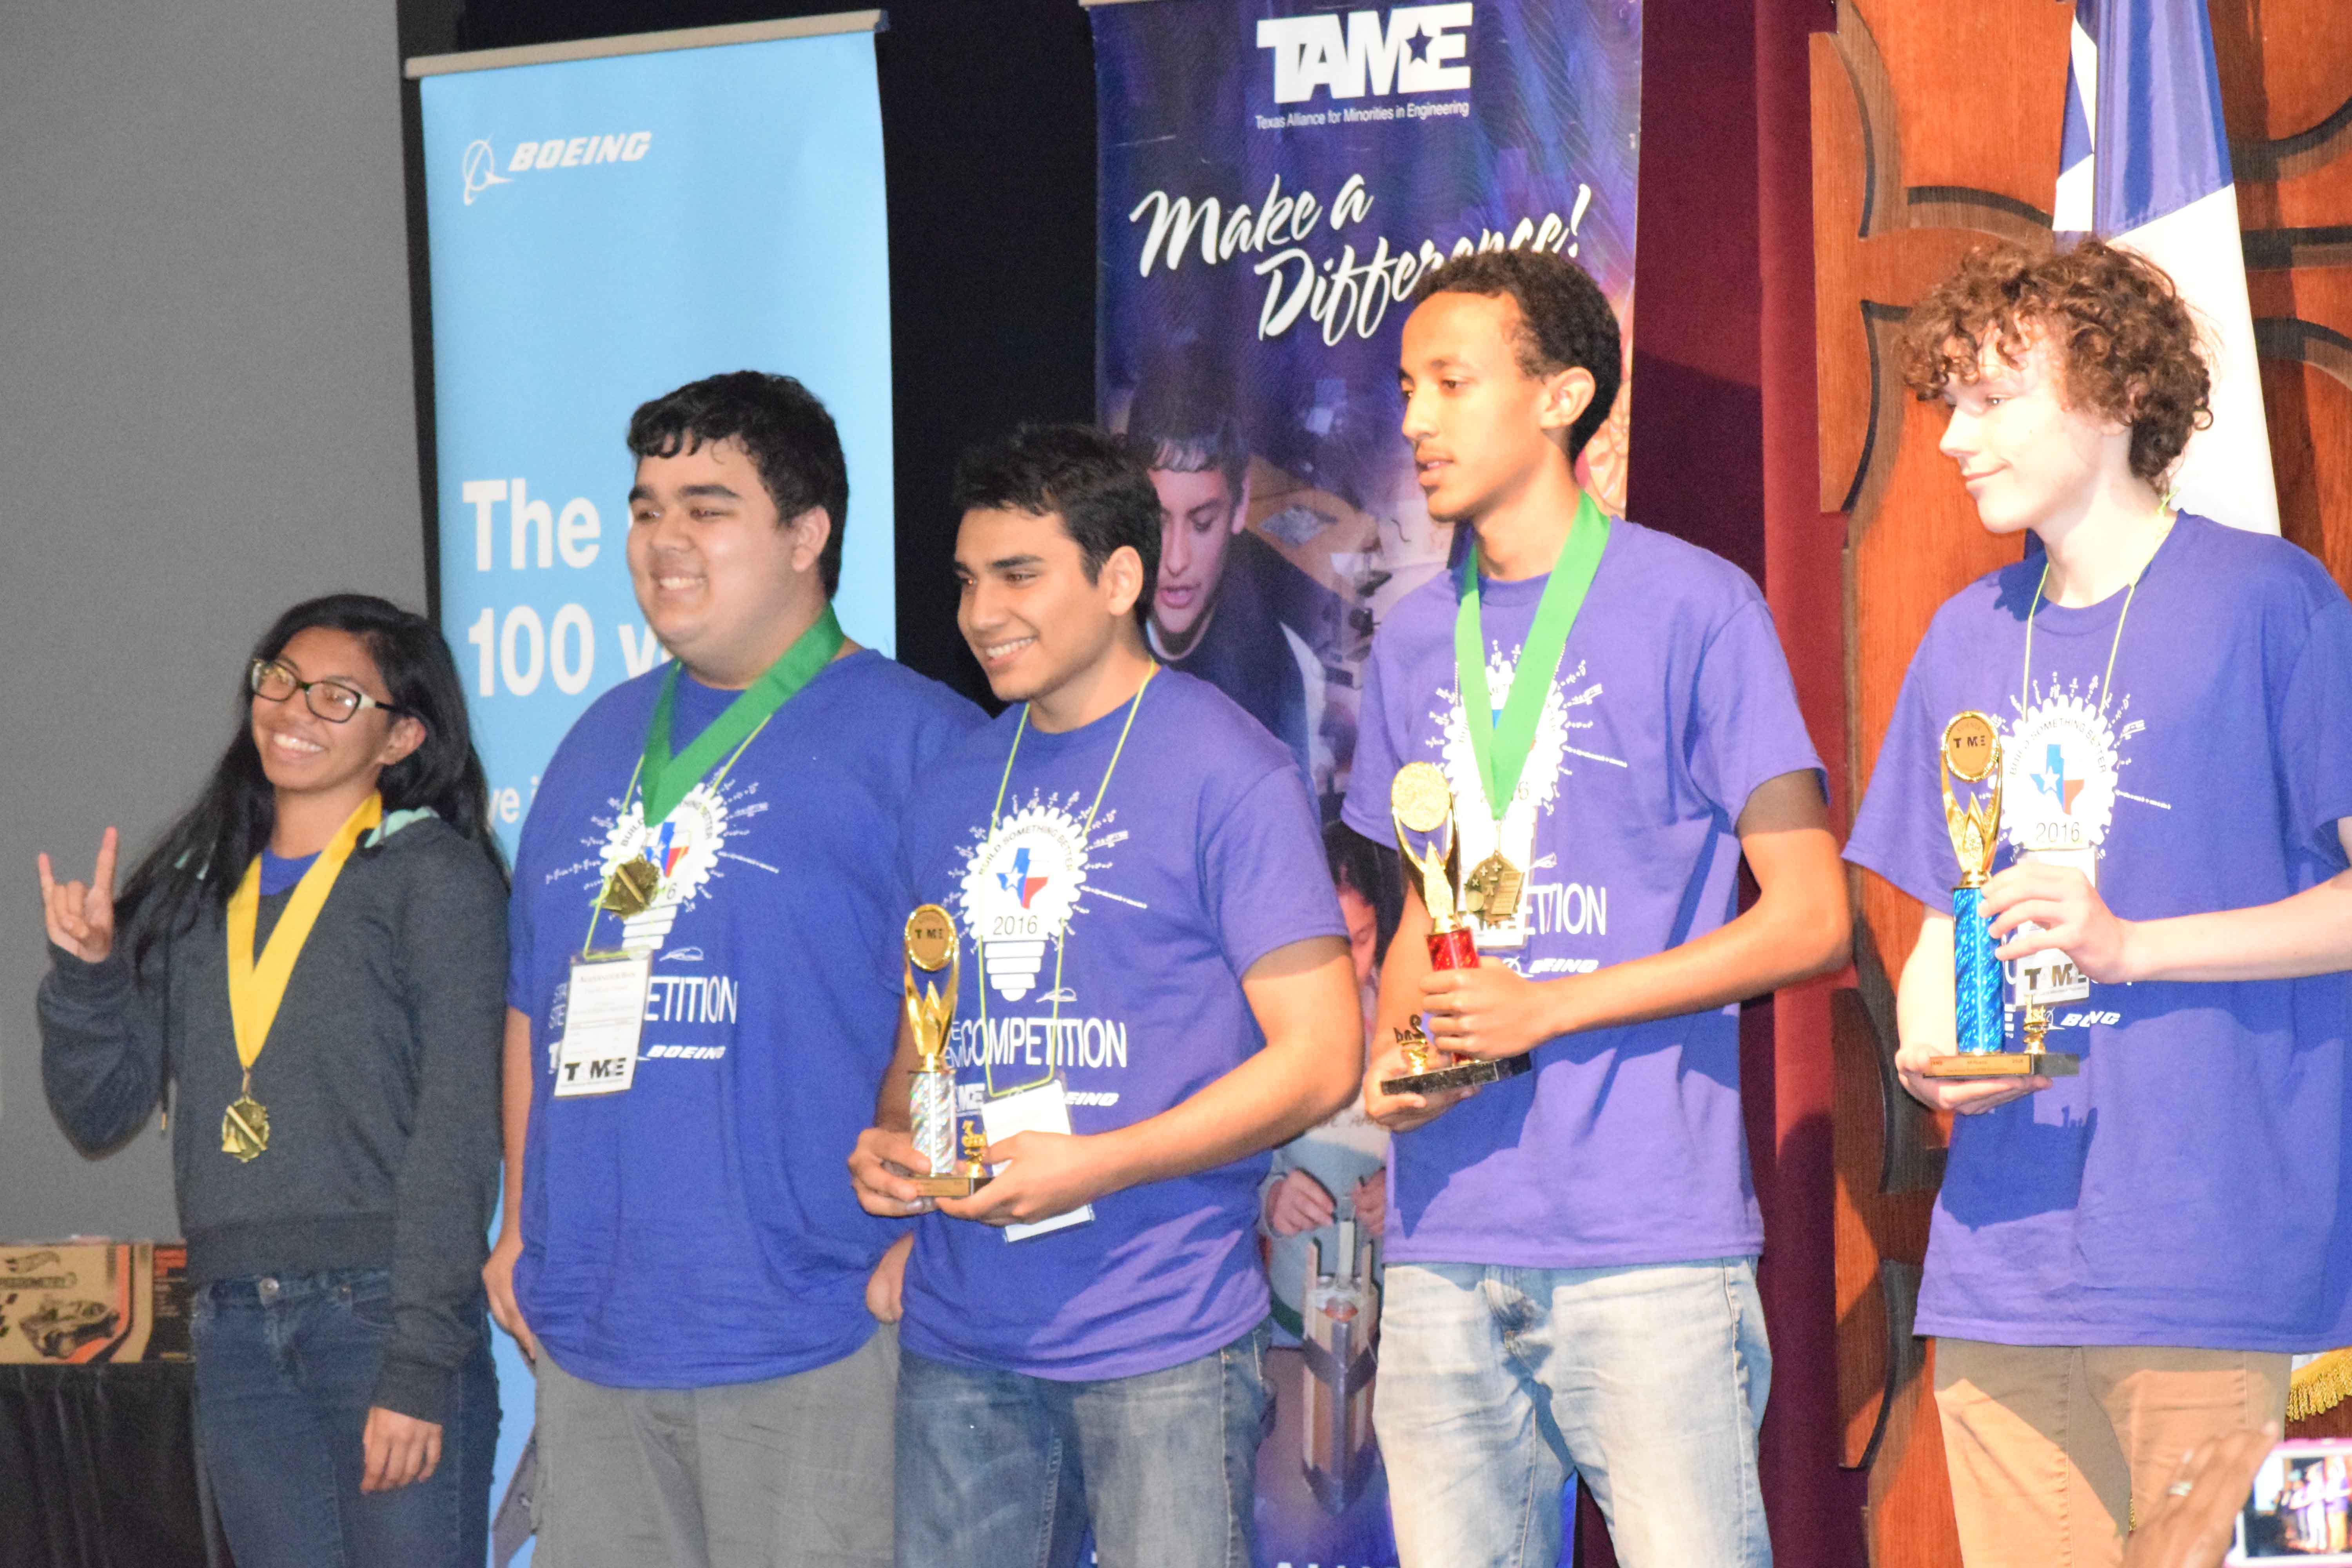 The 31st annual TAME State STEM Competition was sponsored by Boeing and held at the Texas A&M University-San Antonio campus on Saturday, April 30, 2016. 